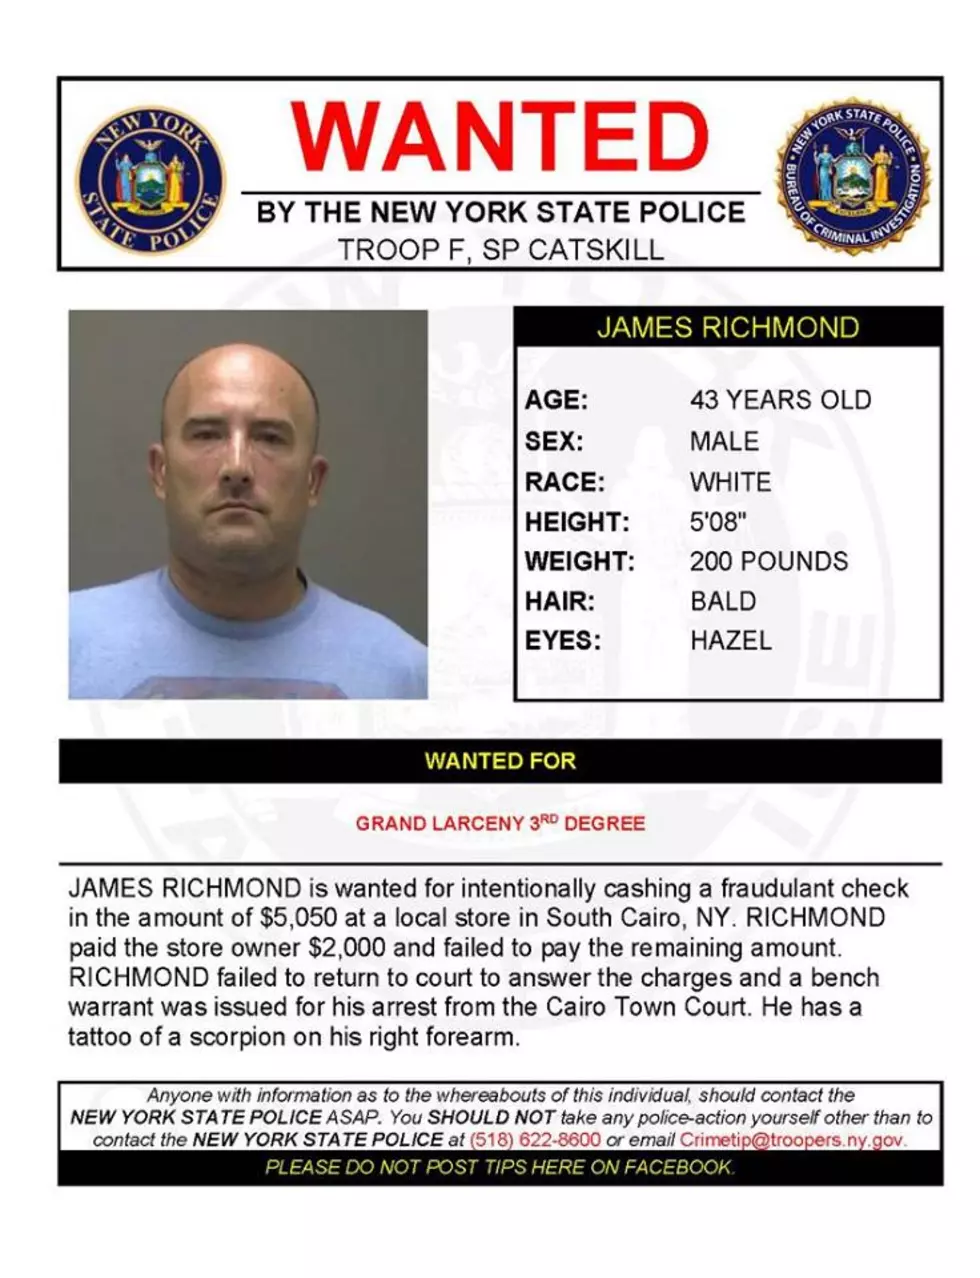 Warrant Wednesday: Ulster County Man Wanted For Grand Larceny